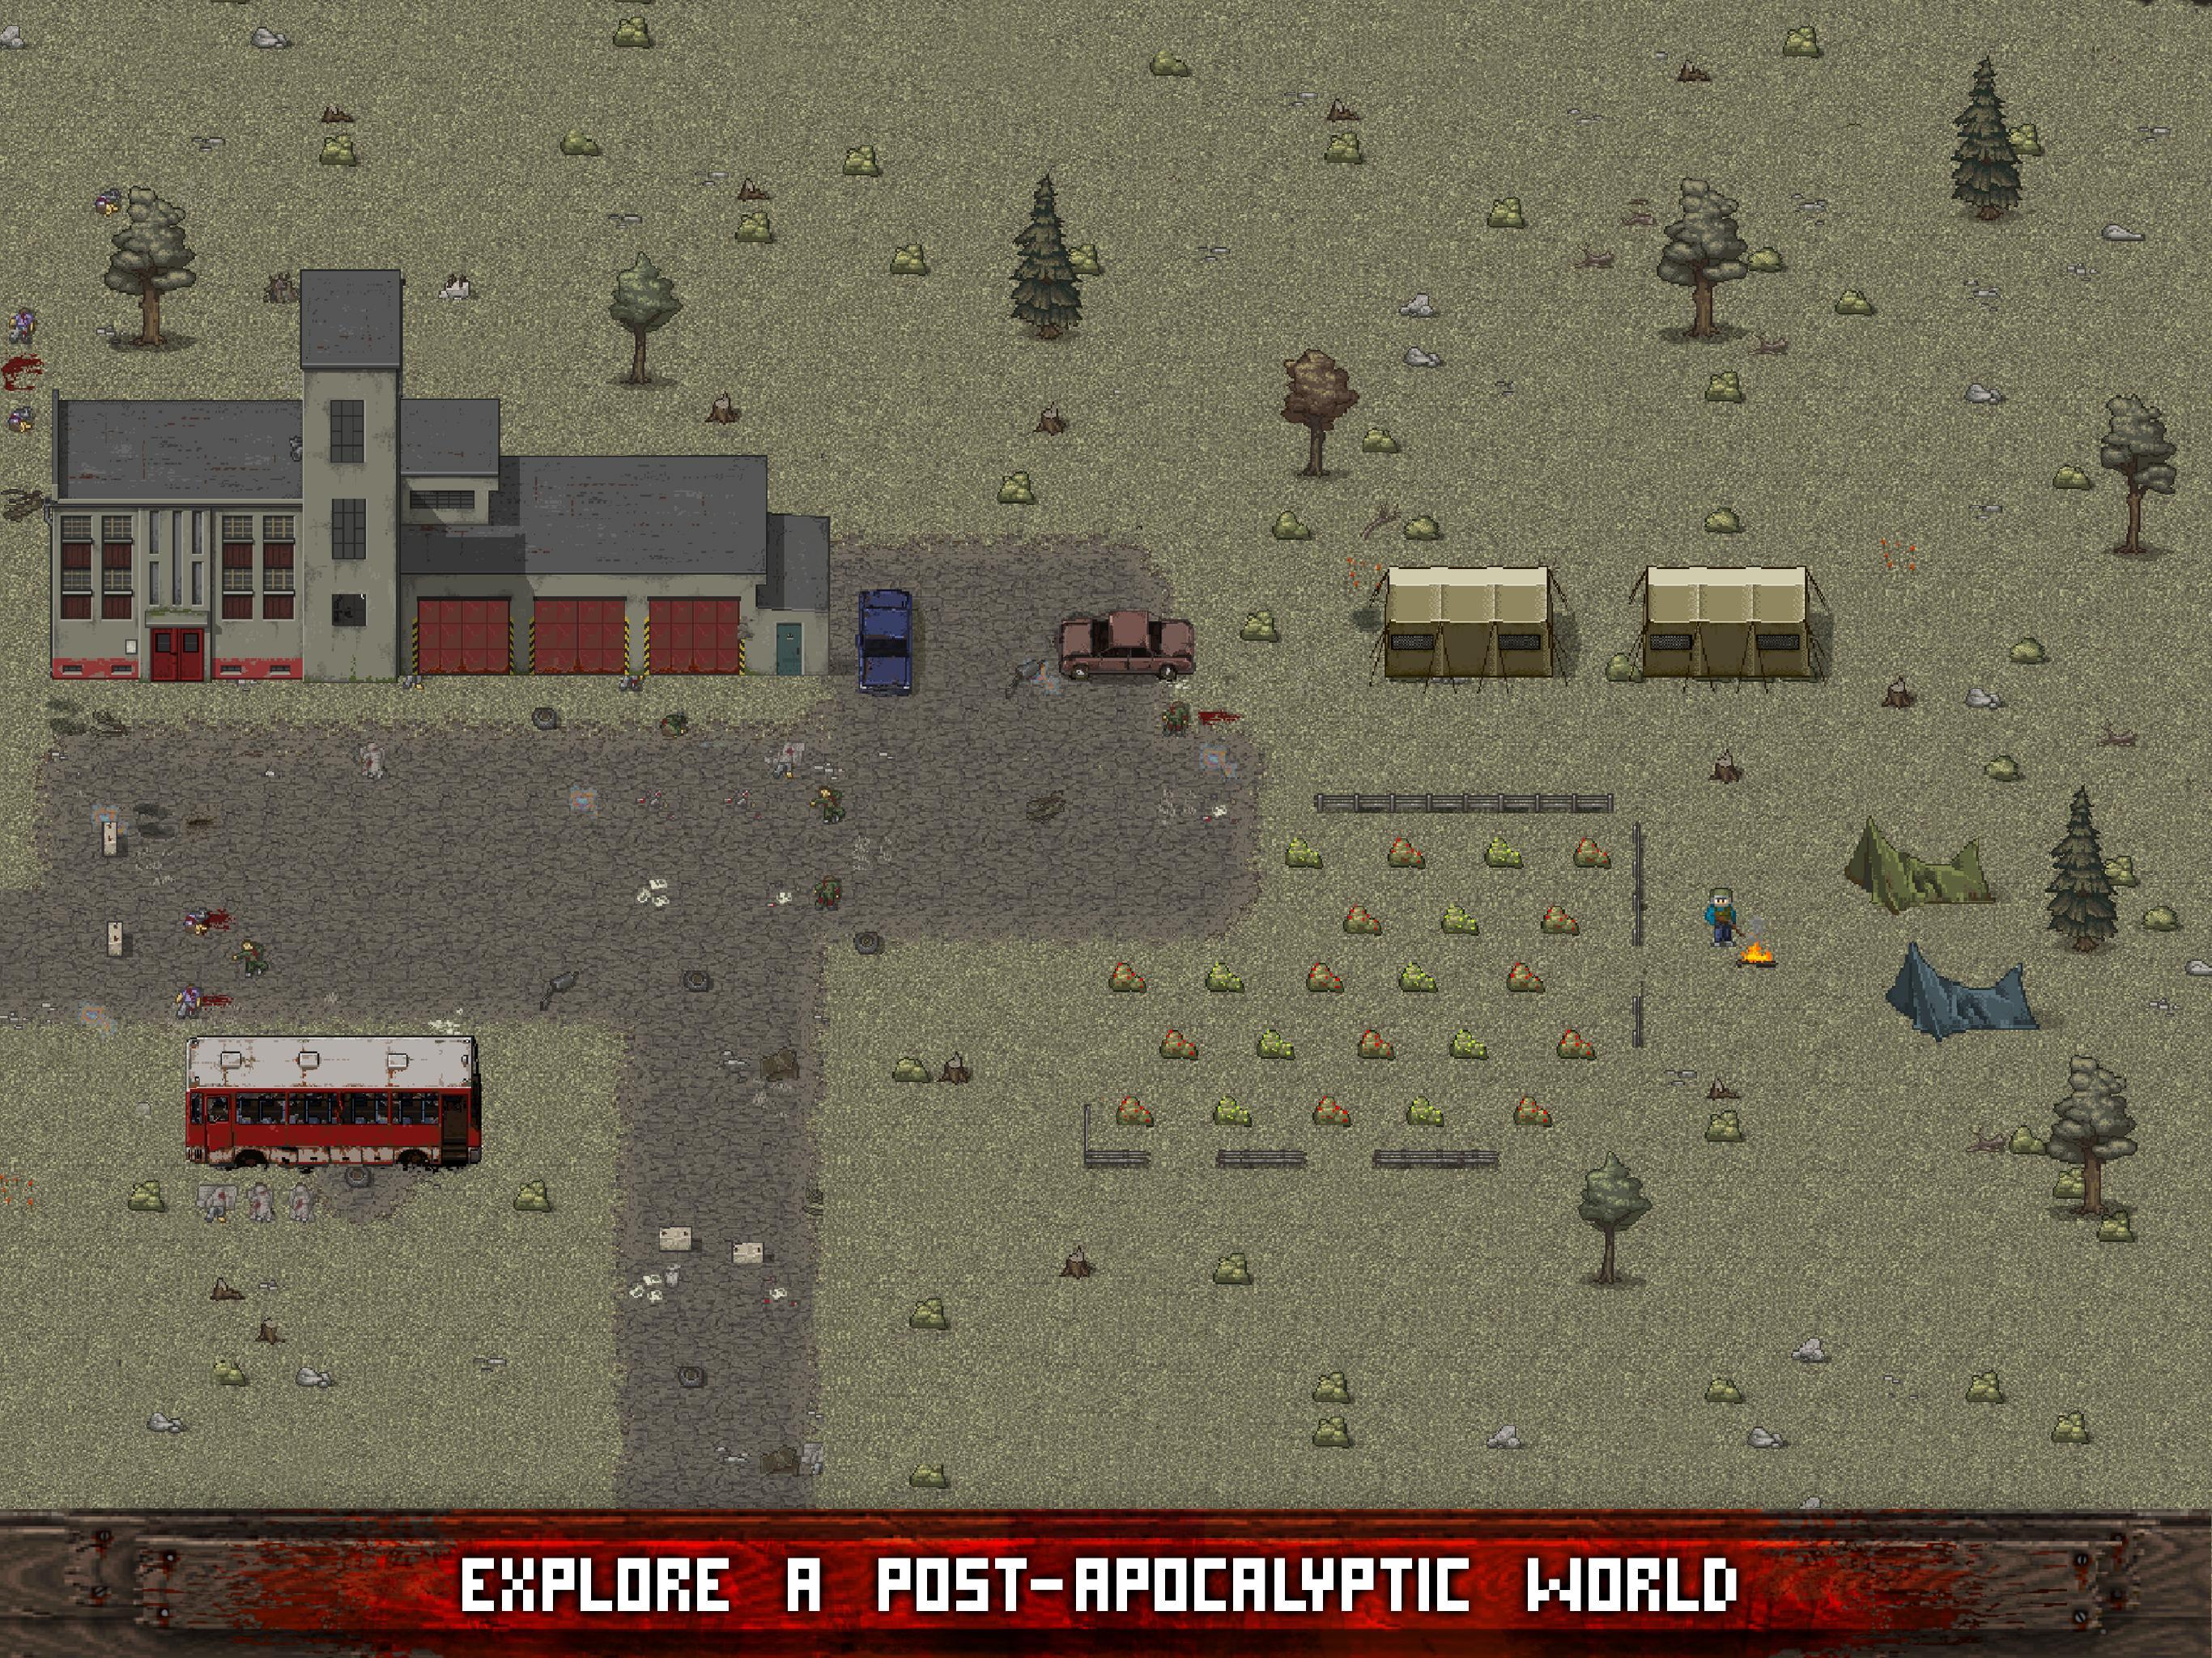 Mini DAYZ has launched on mobile devices!, Blog